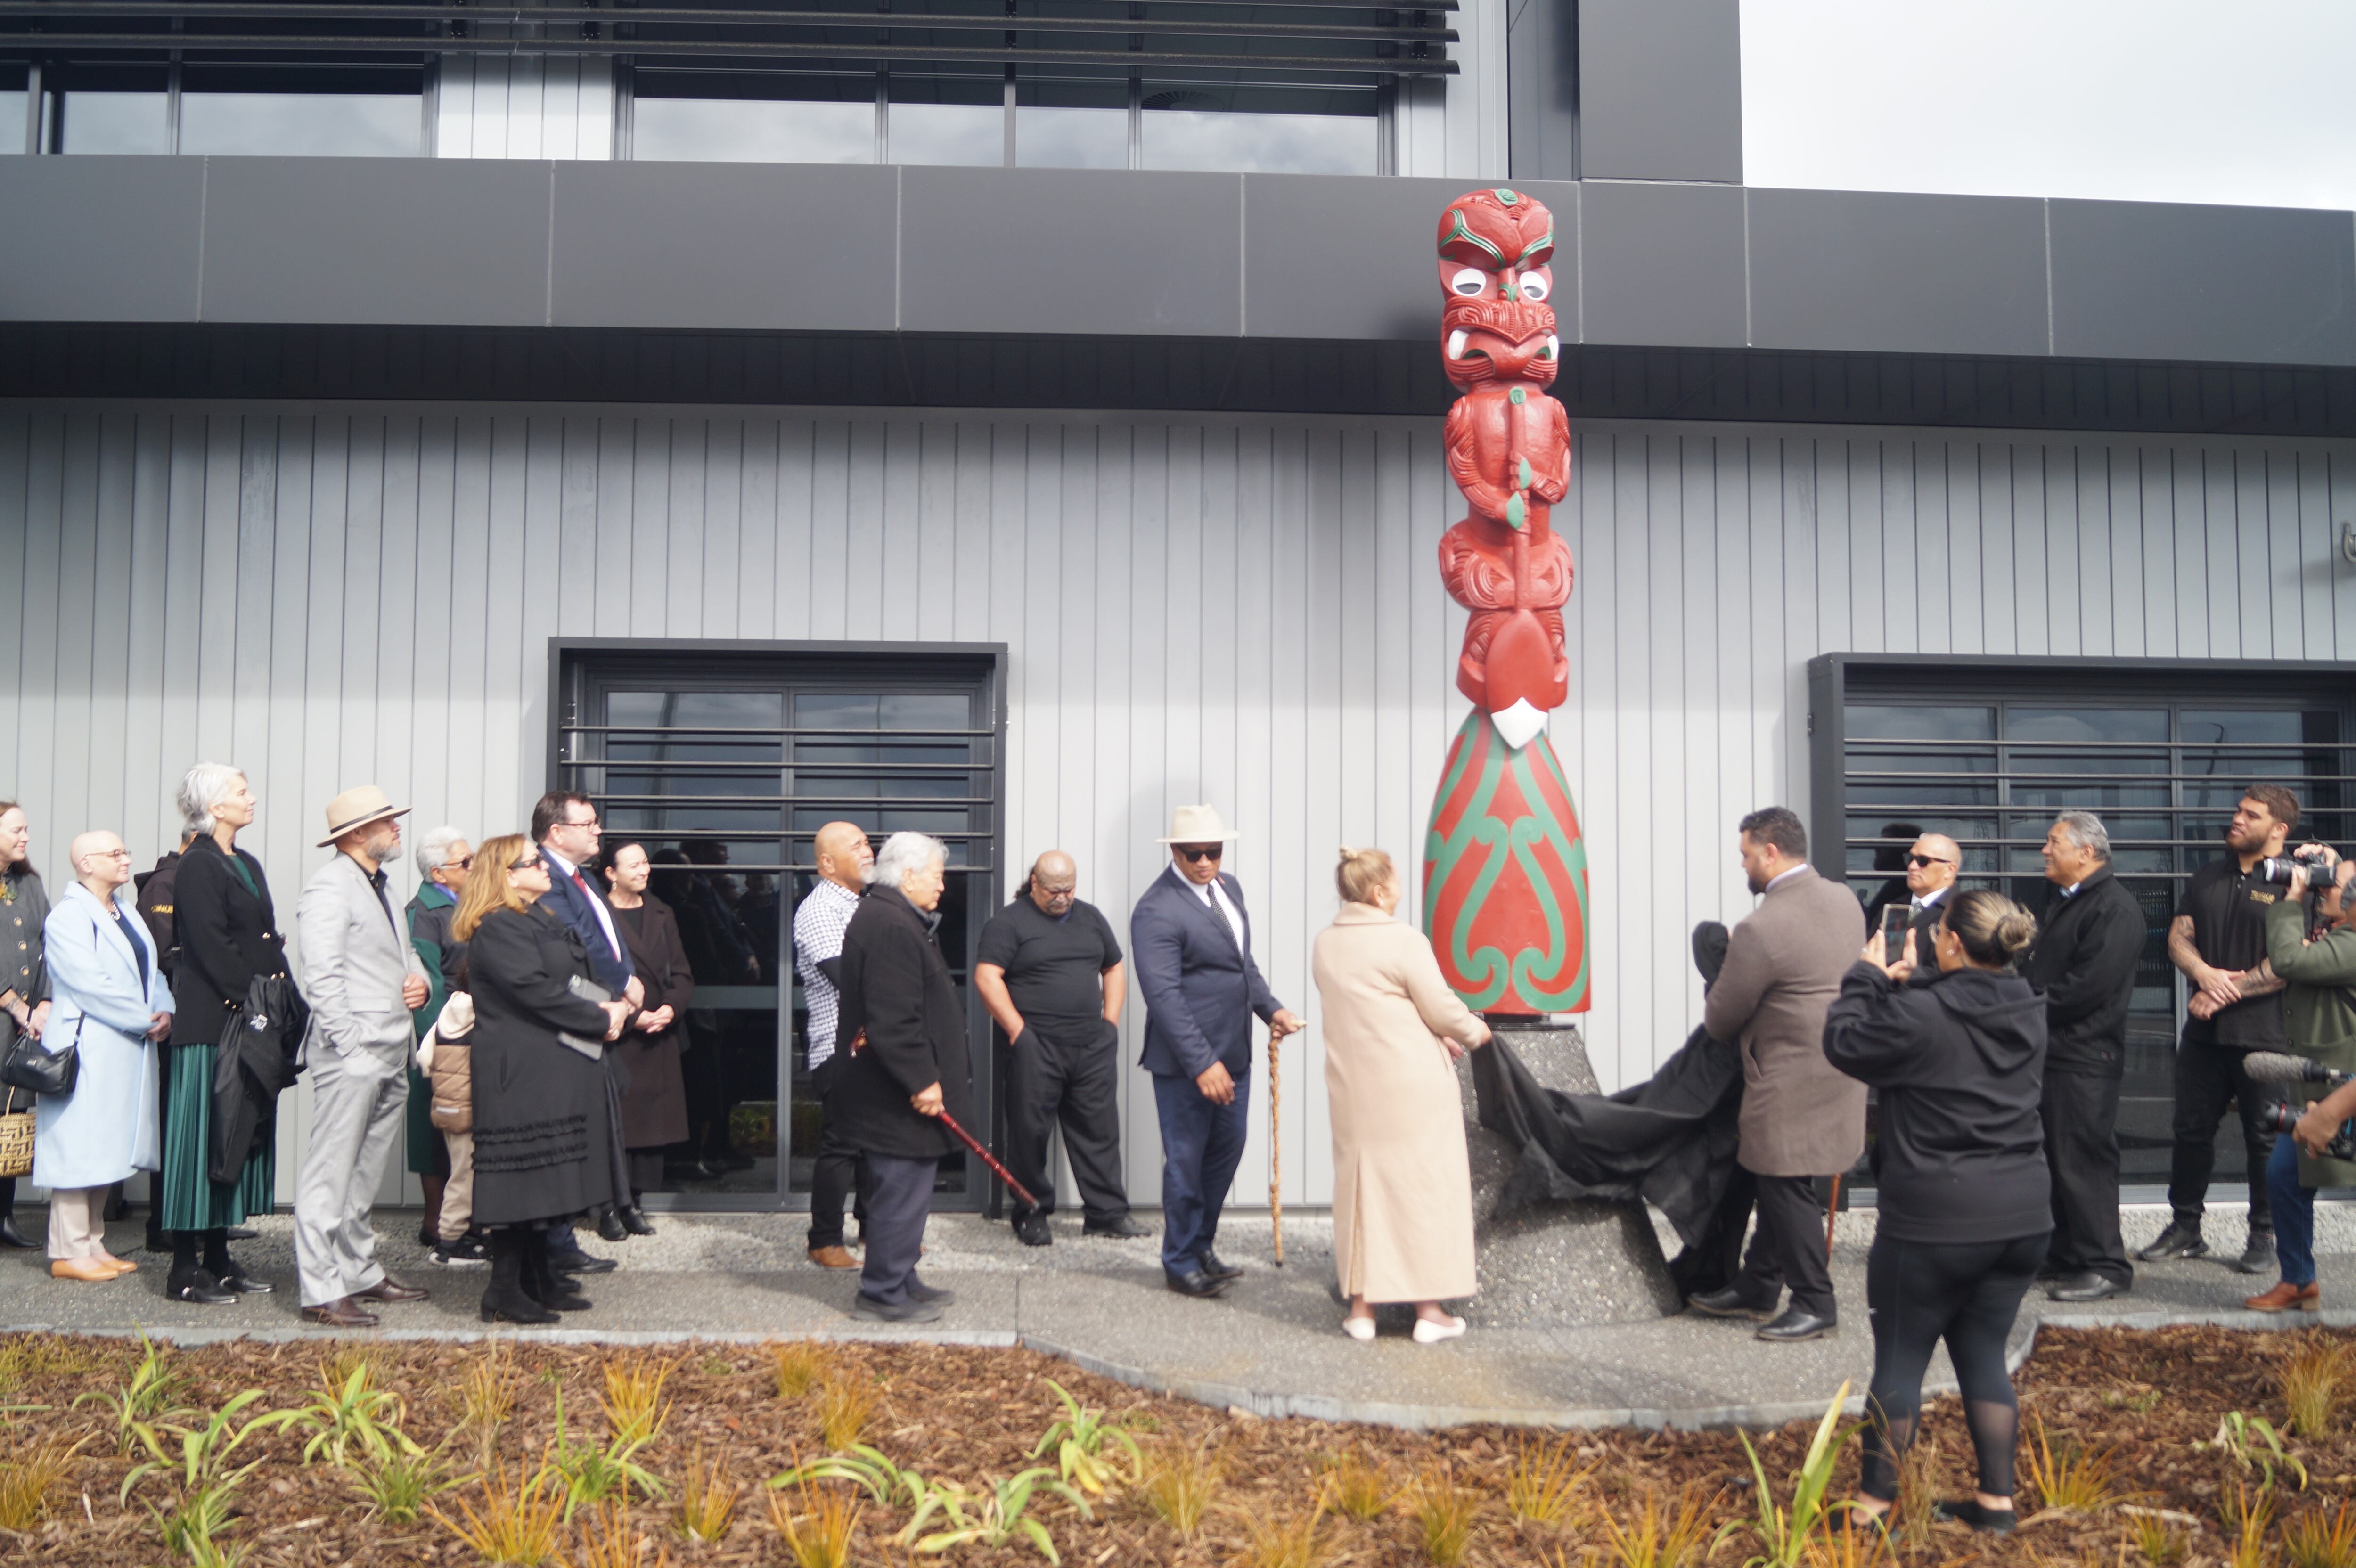 Mana whenua unveiled a pou, located in front of the Kmart Distribution Centre.